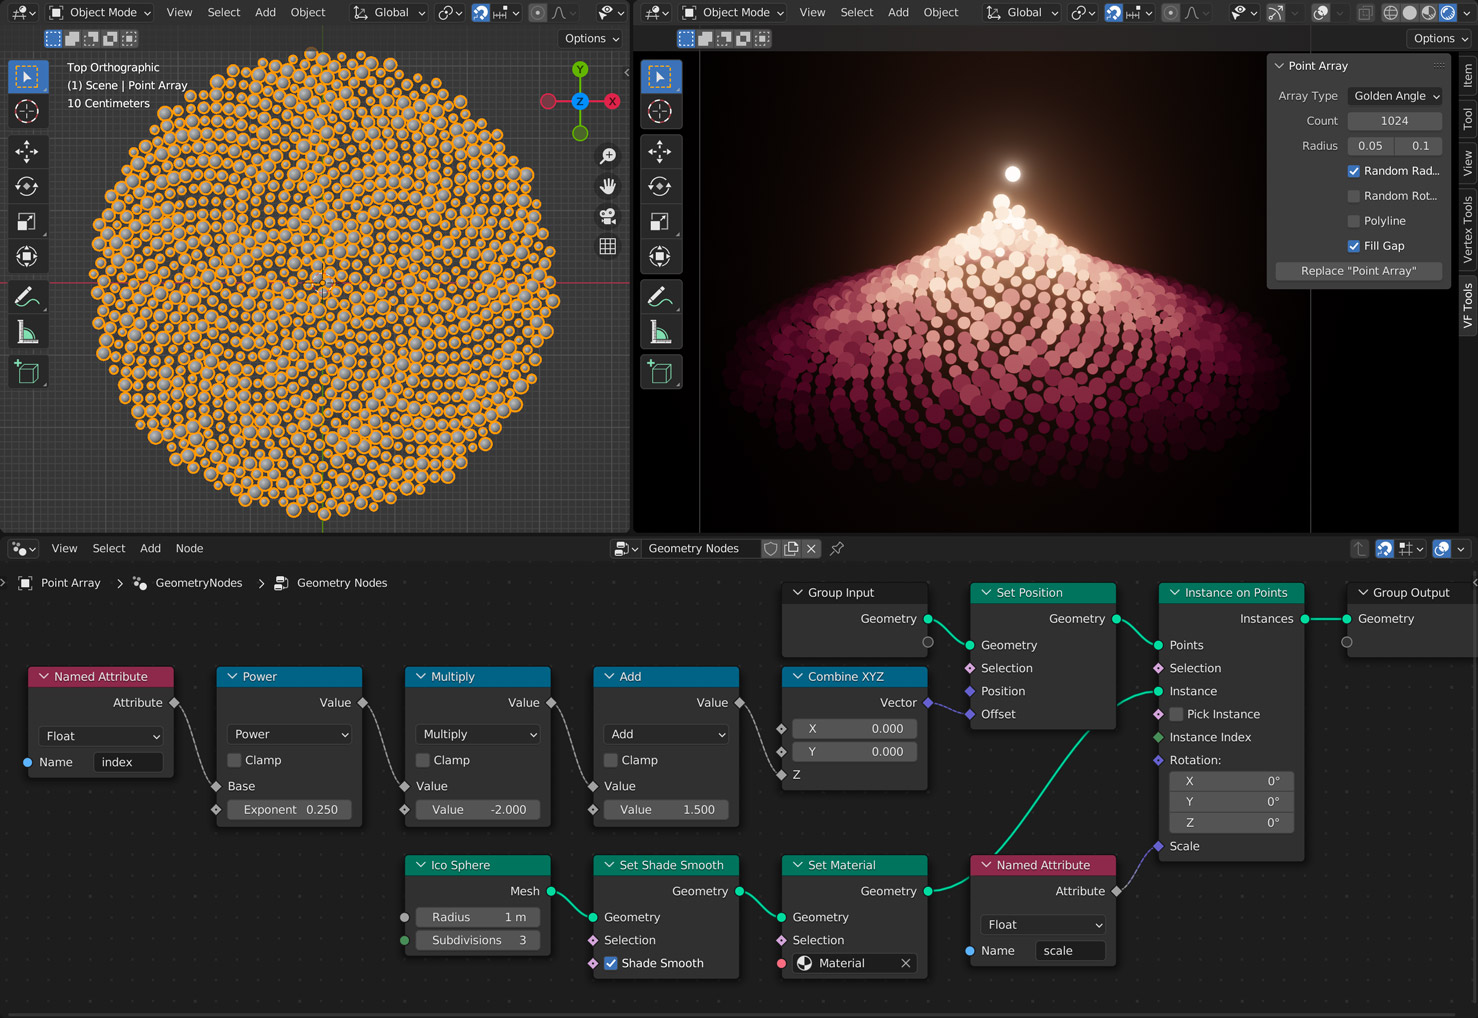 screenshot of the add-on interface in Blender showing the golden angle options and sample geometry nodes setup